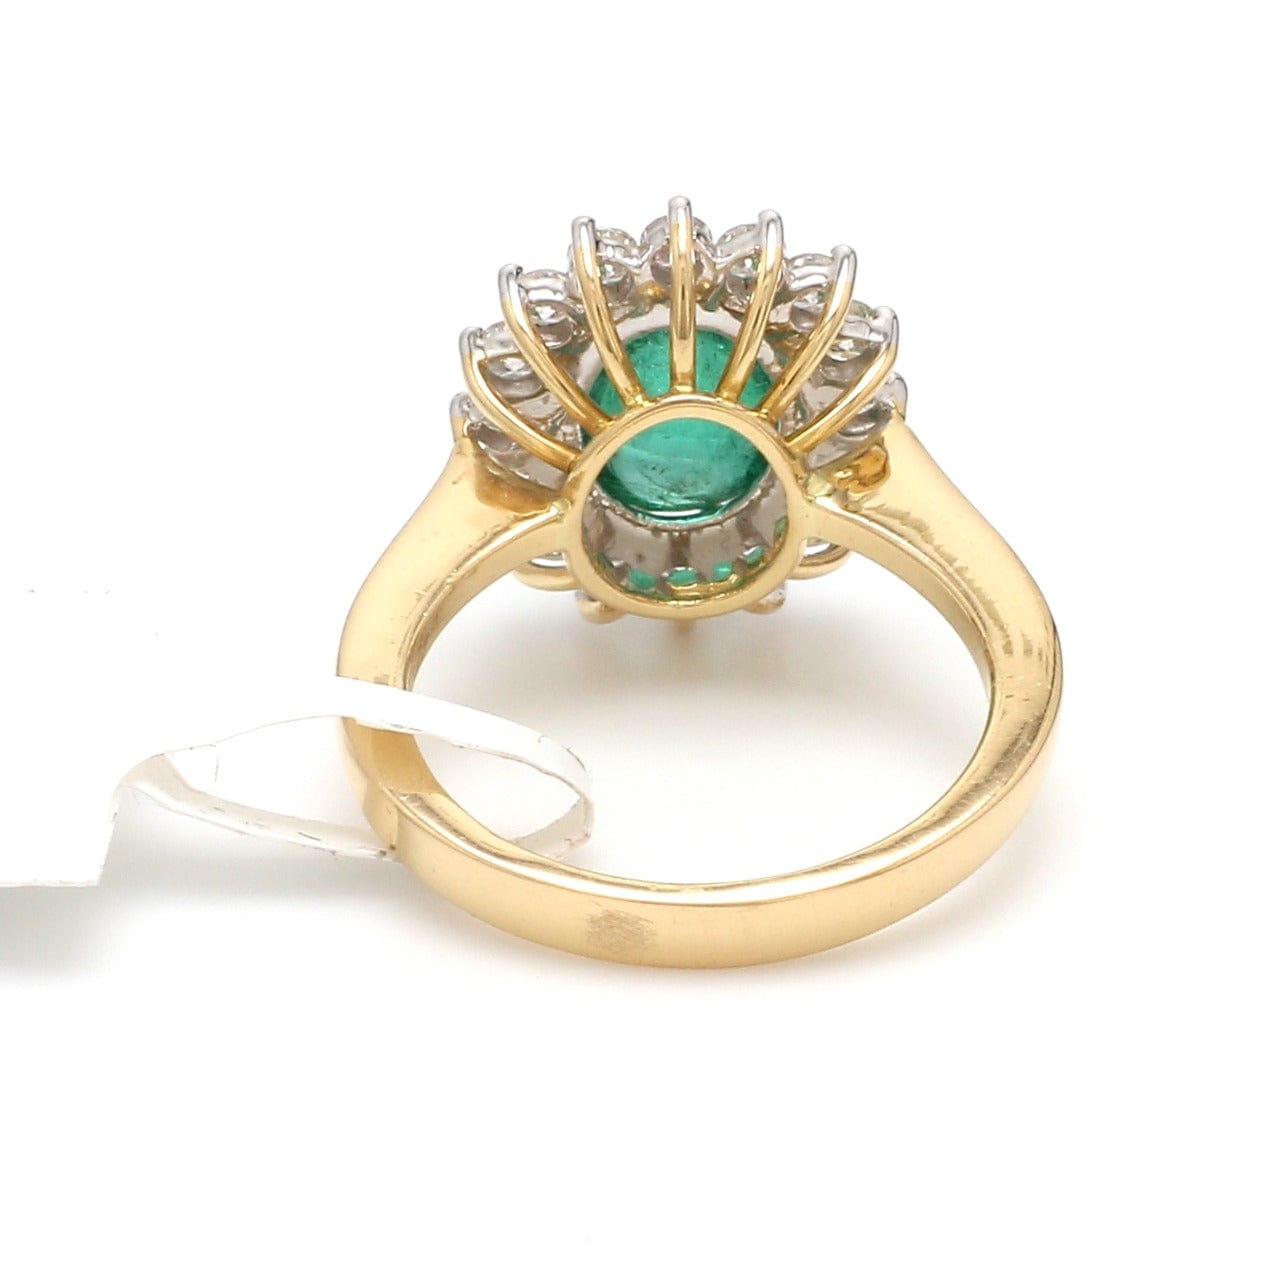 Emerald Ring with Diamonds - Natural Emerald Ring - G&D Unique Designs